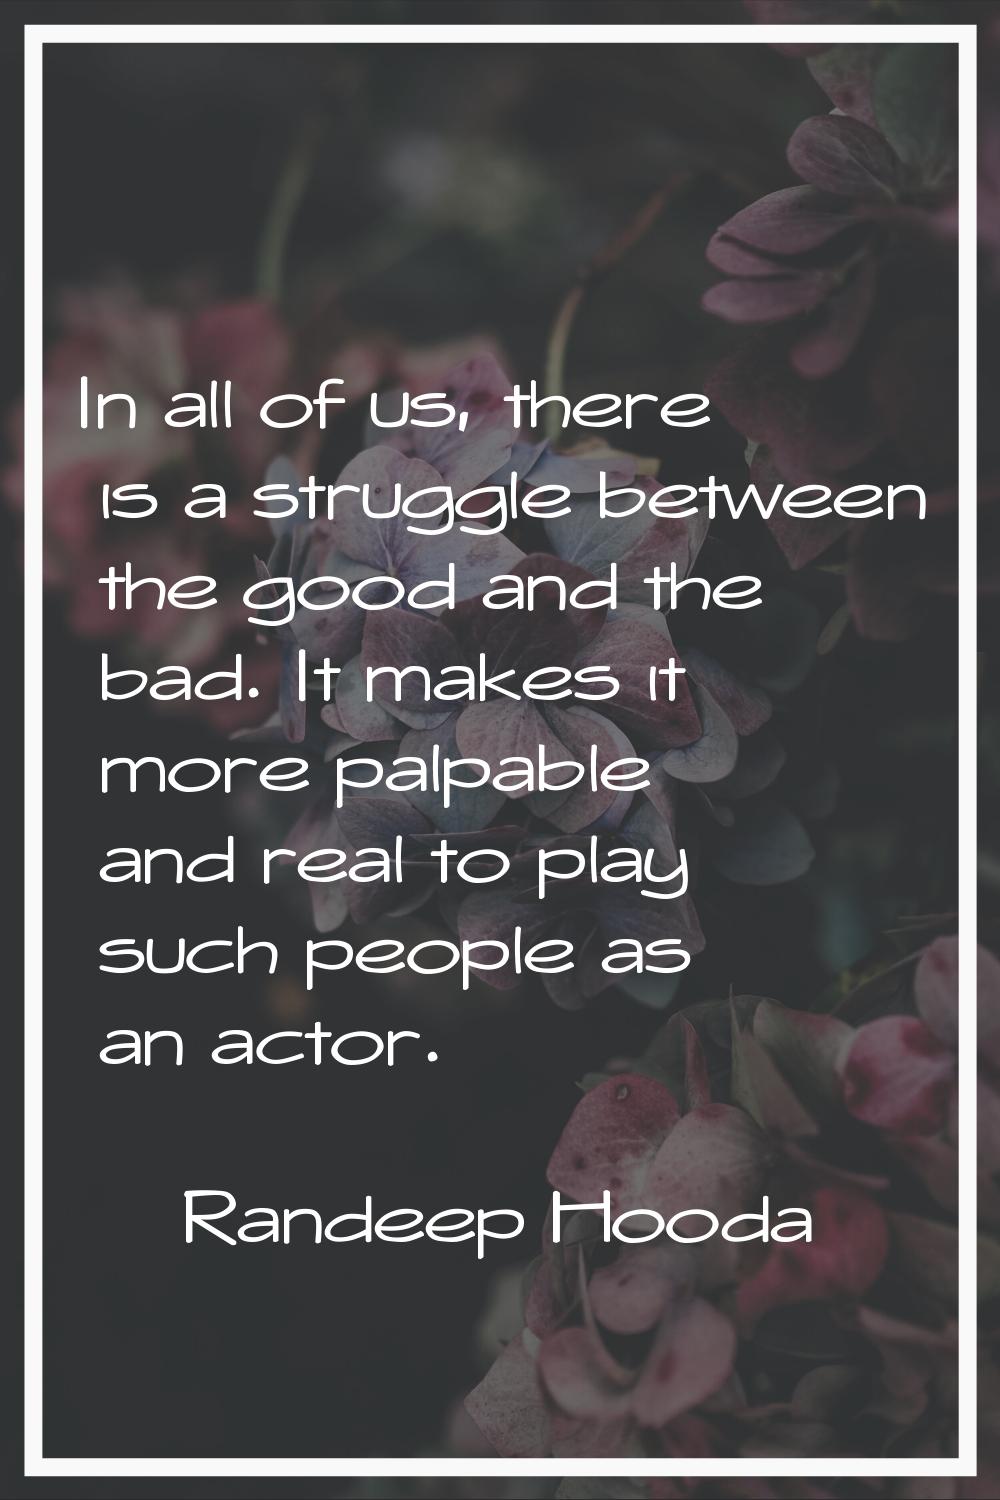 In all of us, there is a struggle between the good and the bad. It makes it more palpable and real 